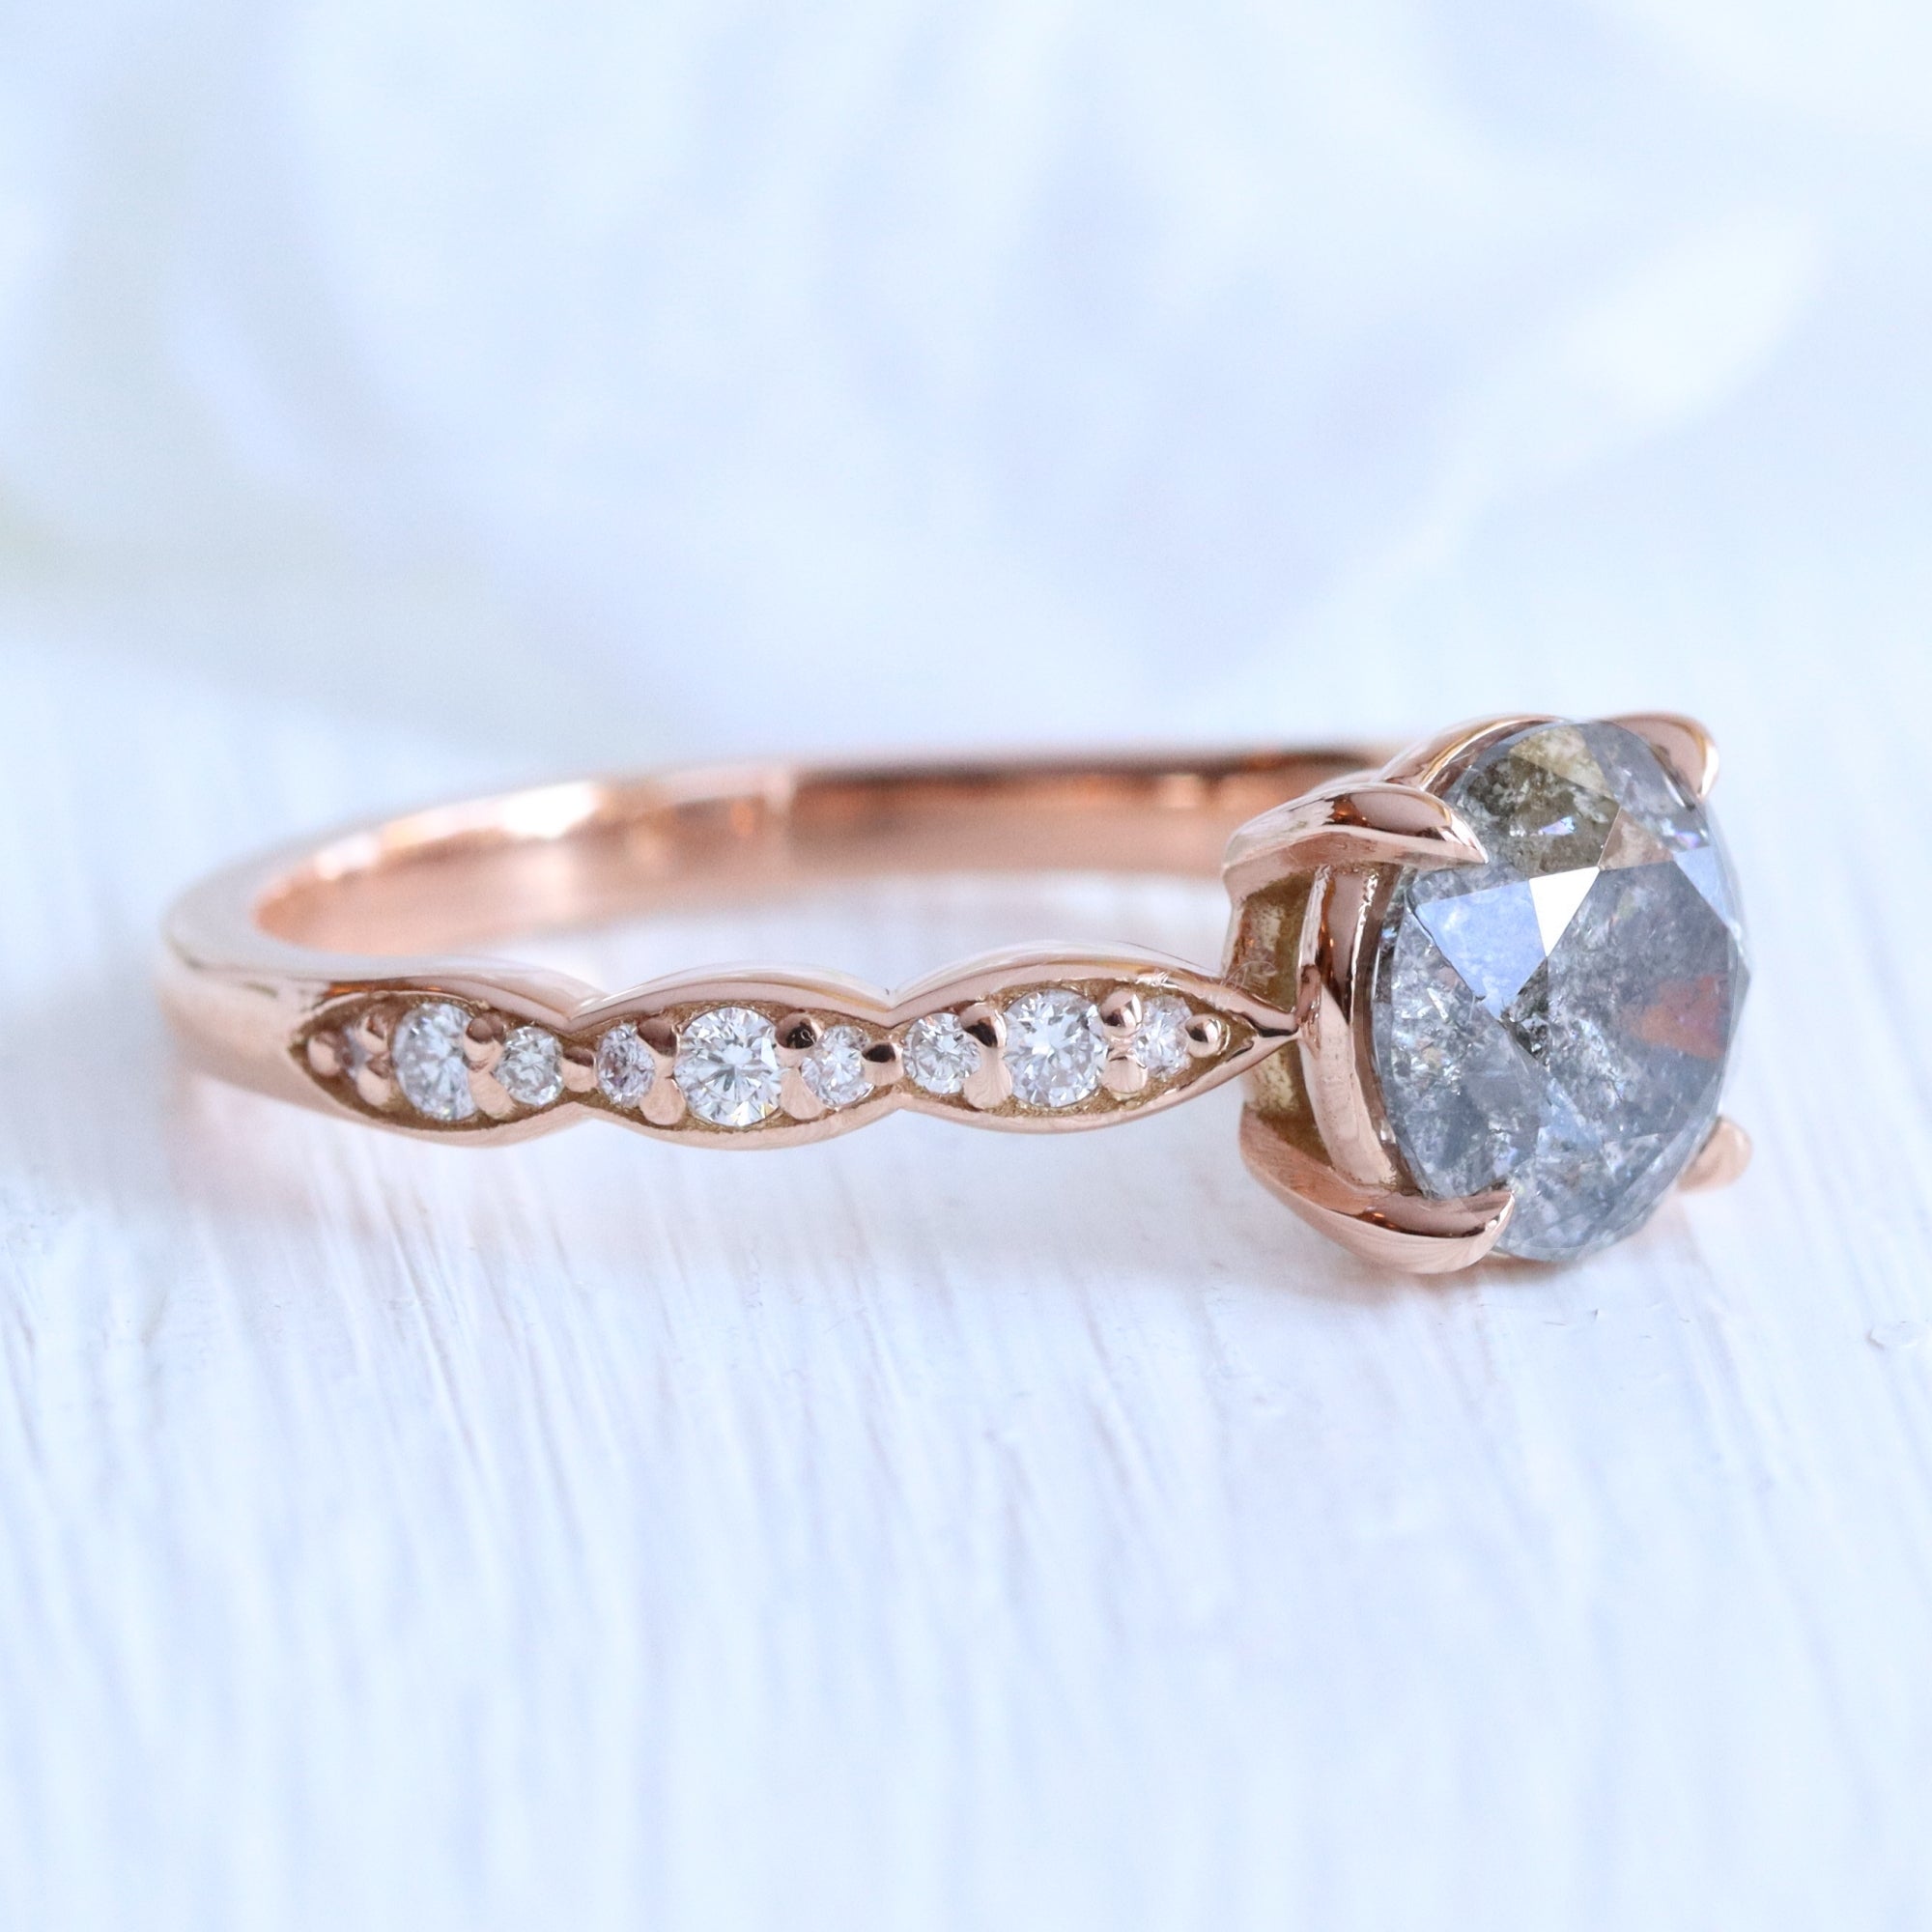 solitaire salt and pepper diamond ring rose gold low setting scalloped diamond engagement ring la more design jewelry